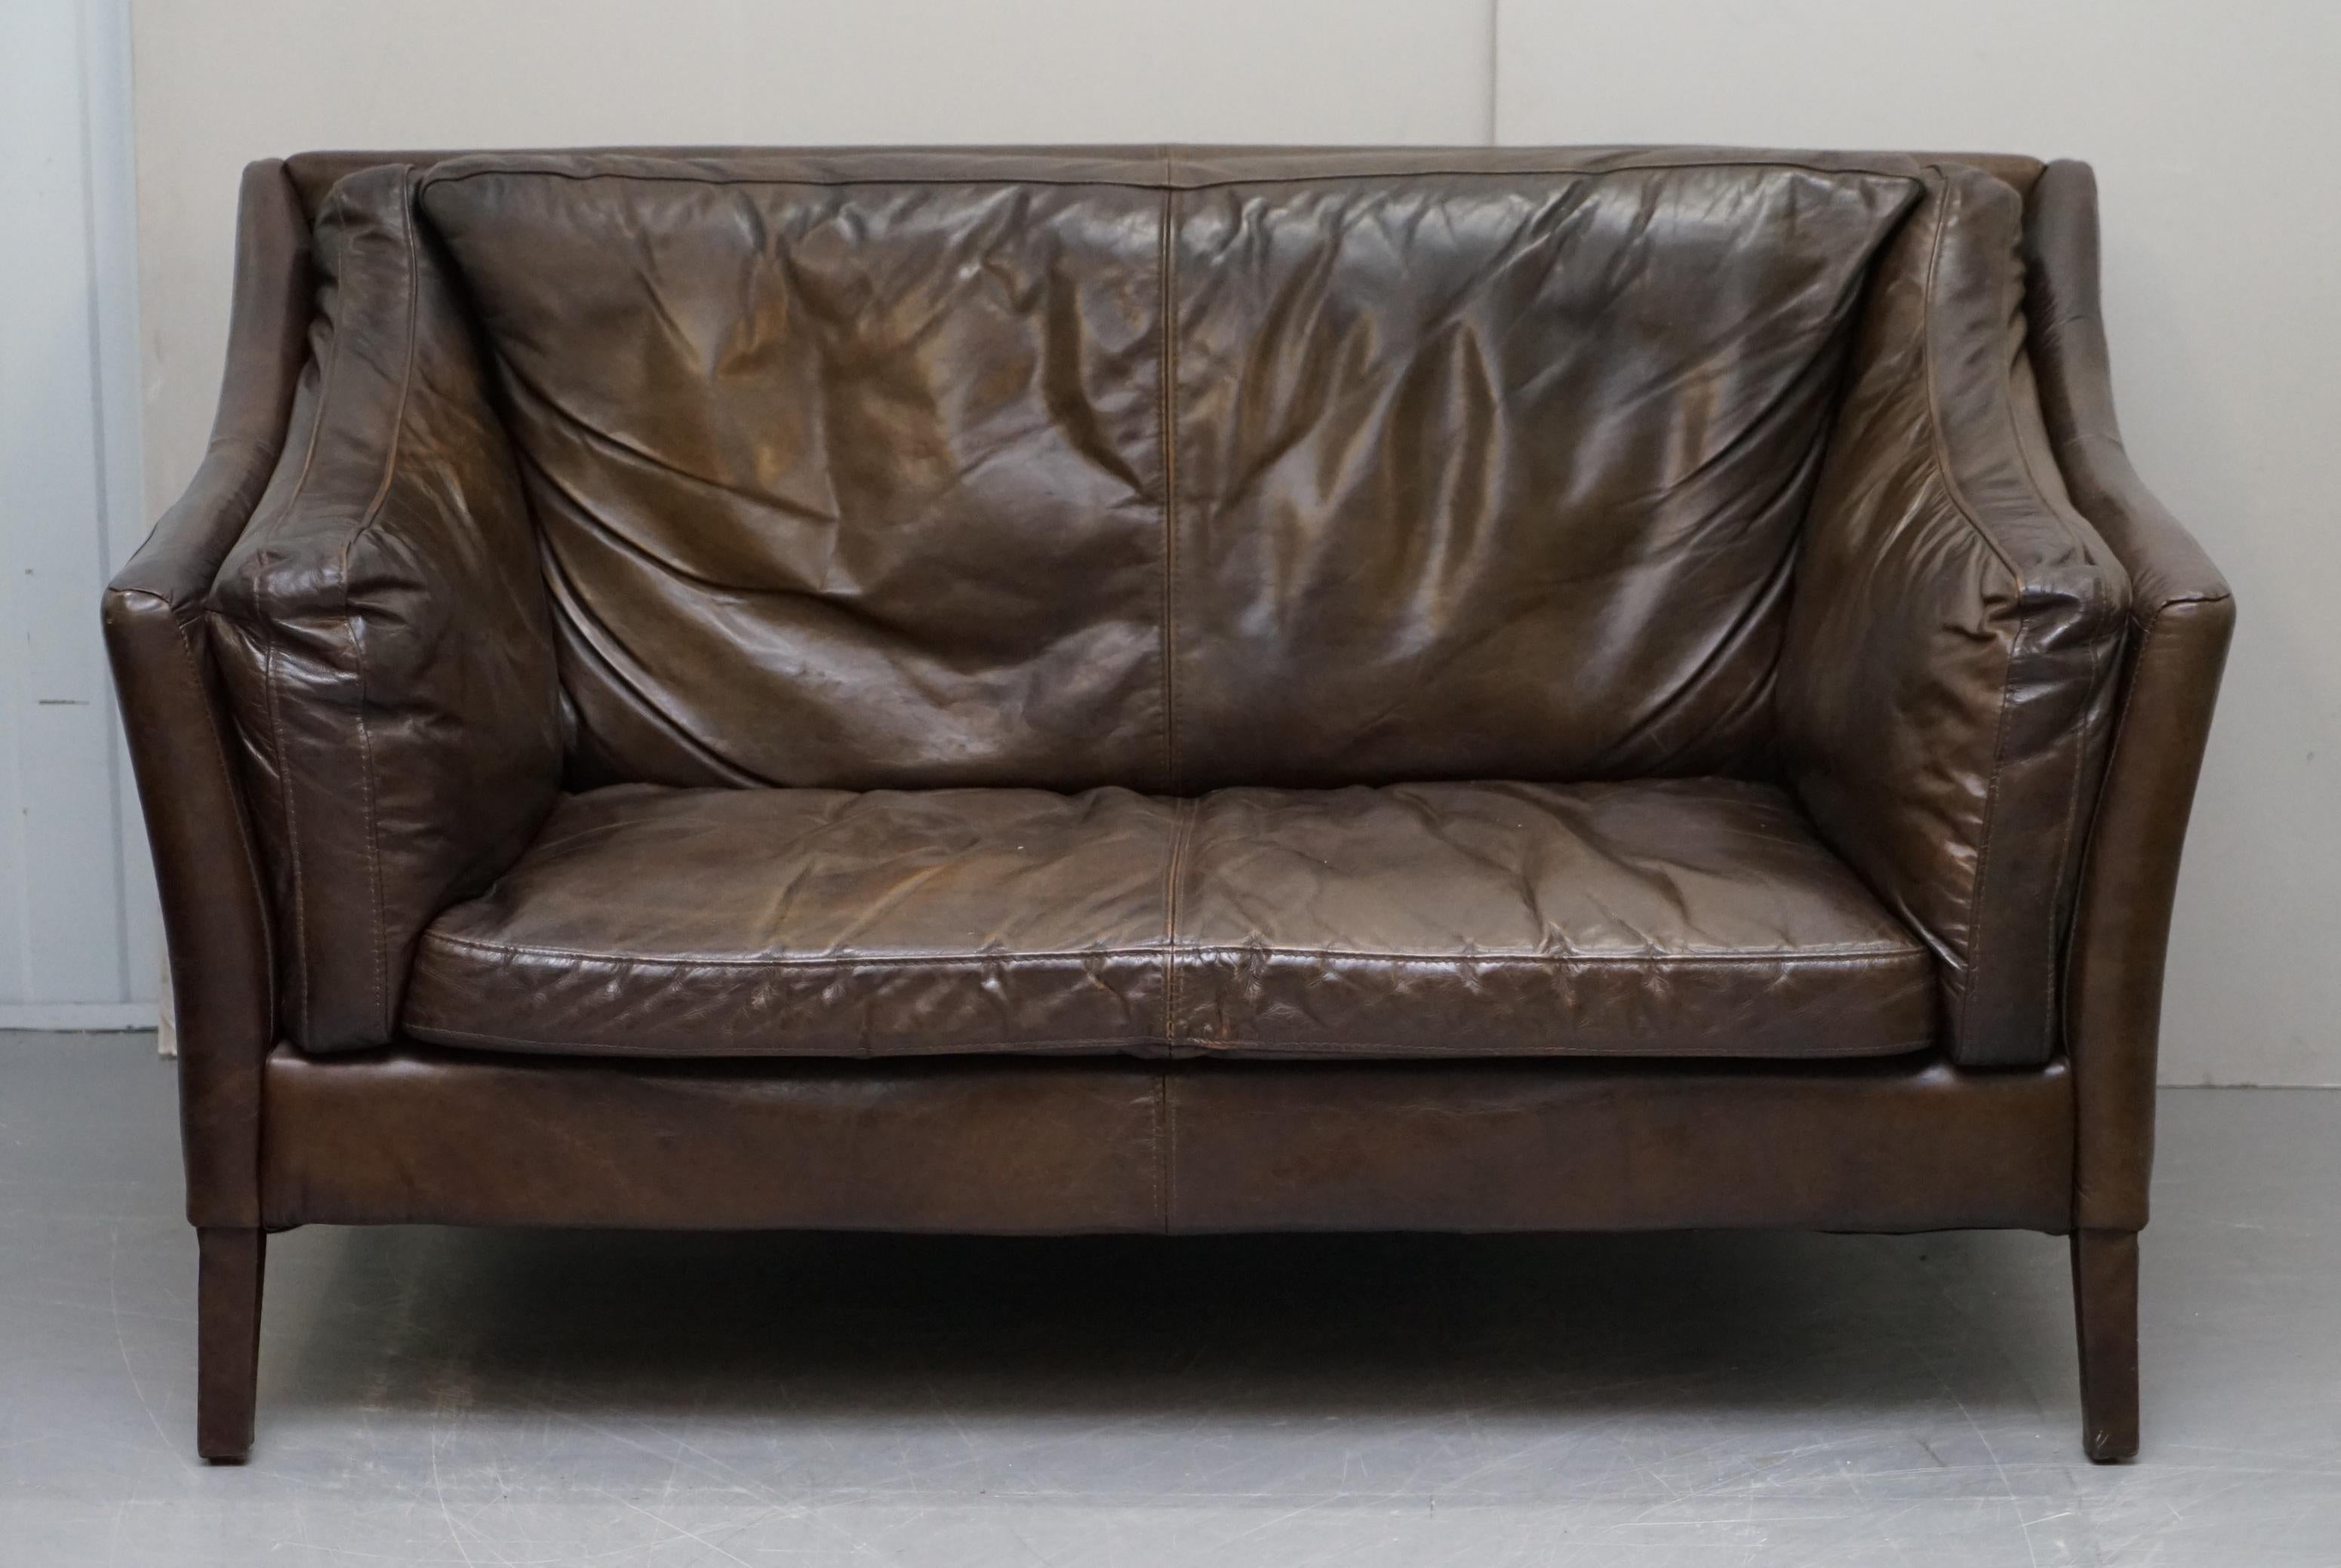 We are delighted to offer for sale this lovely exceptionally comfortable and very compact Halo Reggio brown leather sofa

I owned one of these sofas myself for years, they are exceptionally comfortable, there is just something about the form and